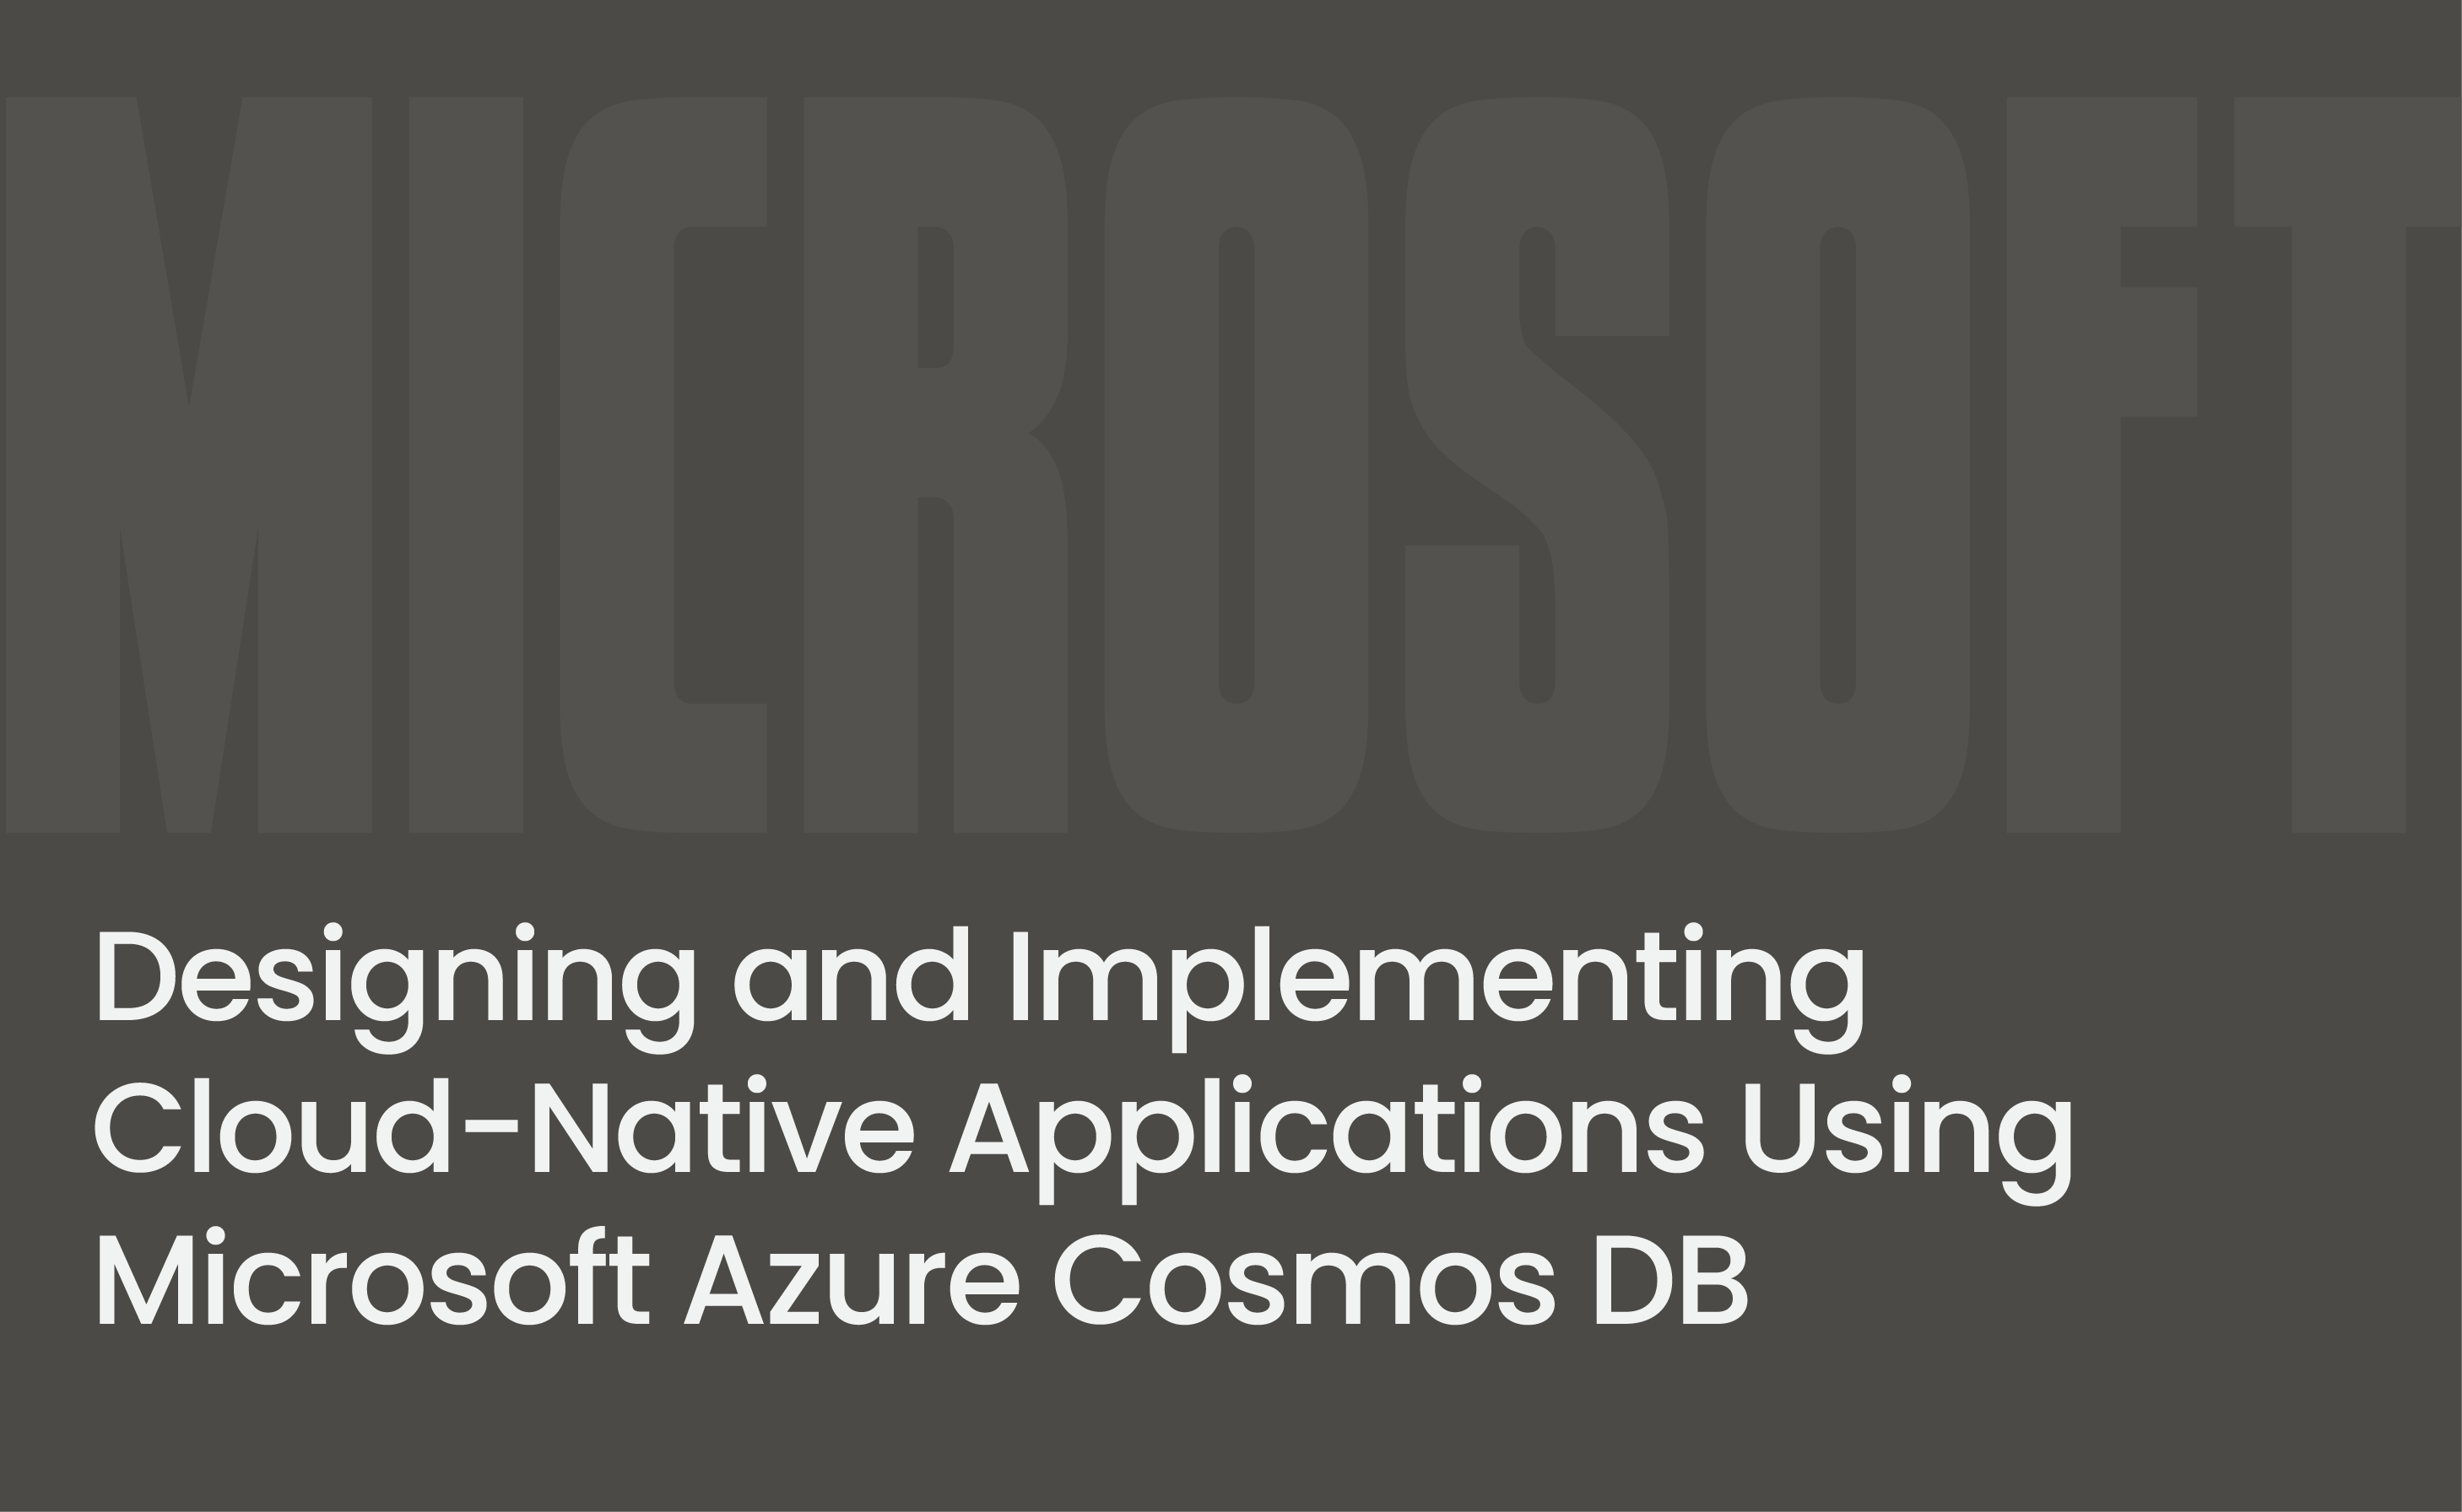 Designing and Implementing Cloud-Native Applications Using Microsoft Azure Cosmos DB